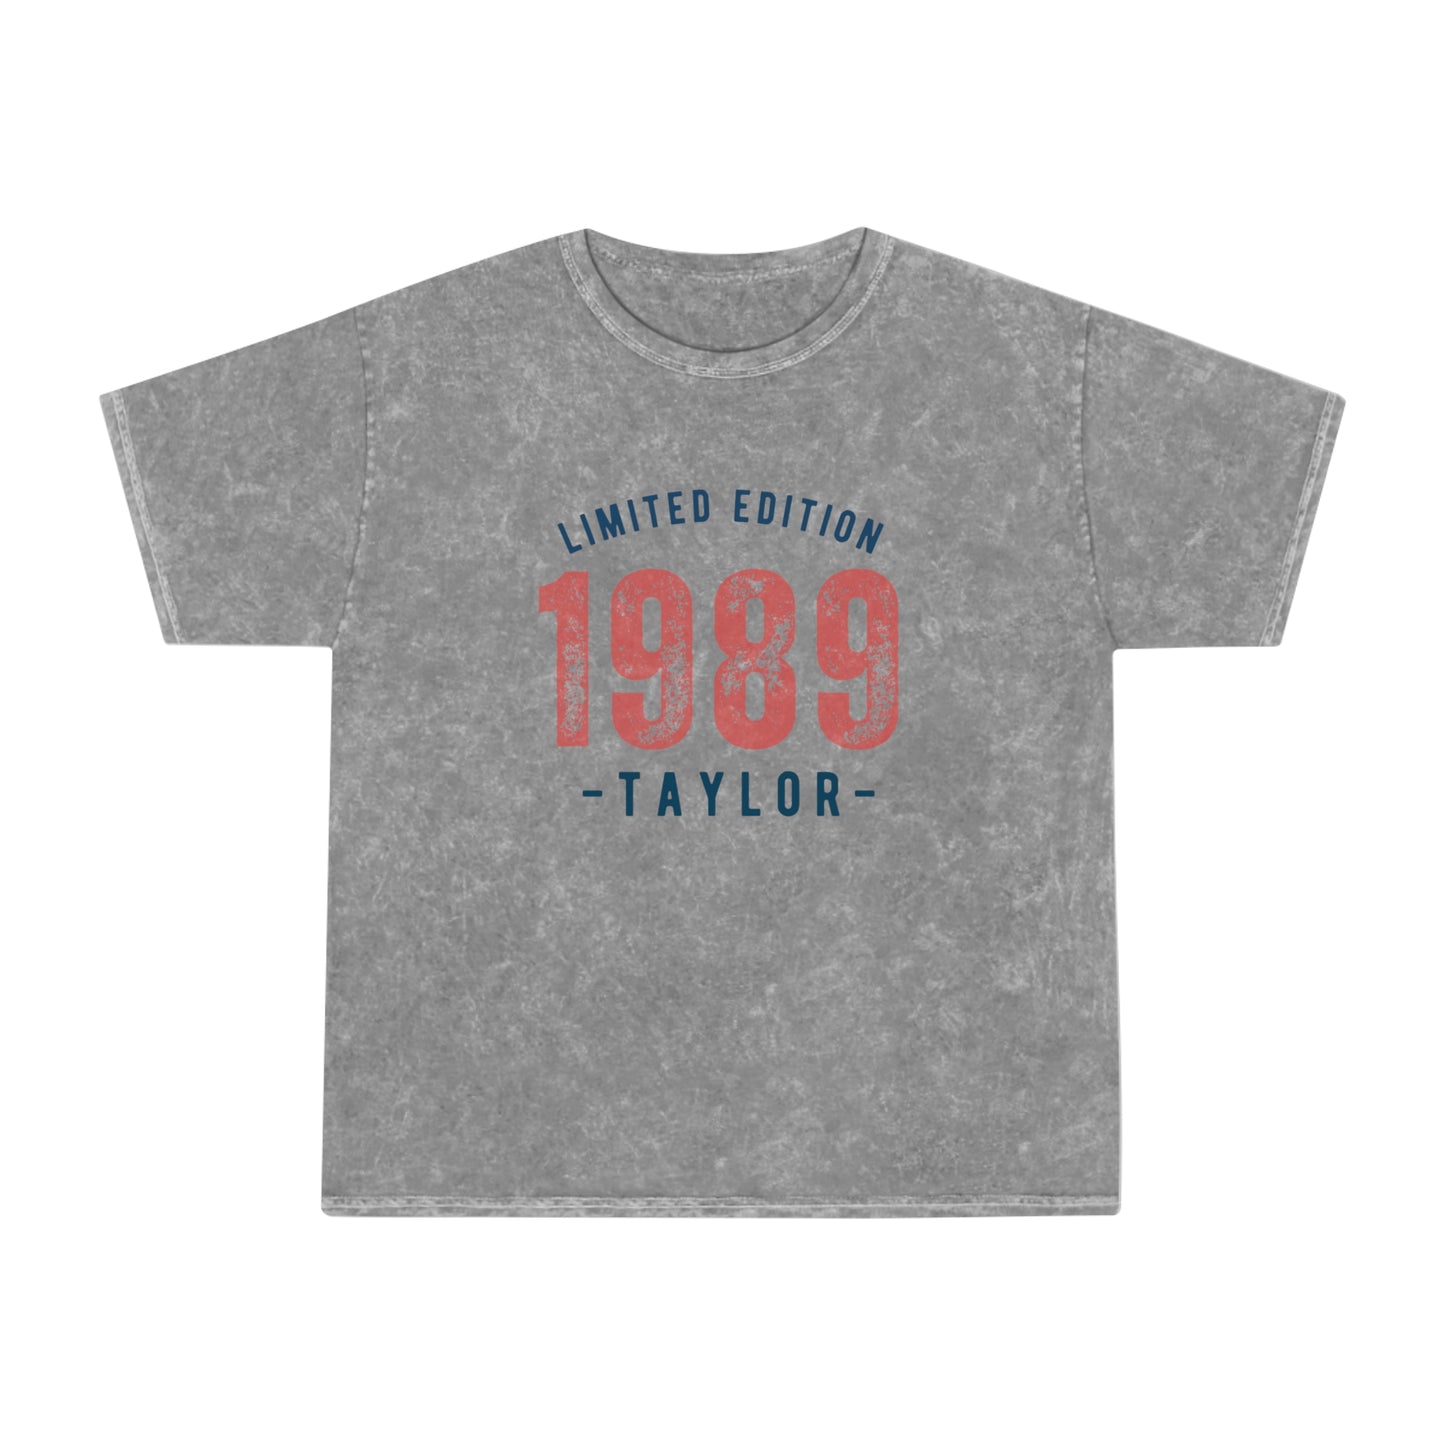 Taylor Swift 1989 Limited Edition Unisex Mineral Wash Vintage Tee Shirt